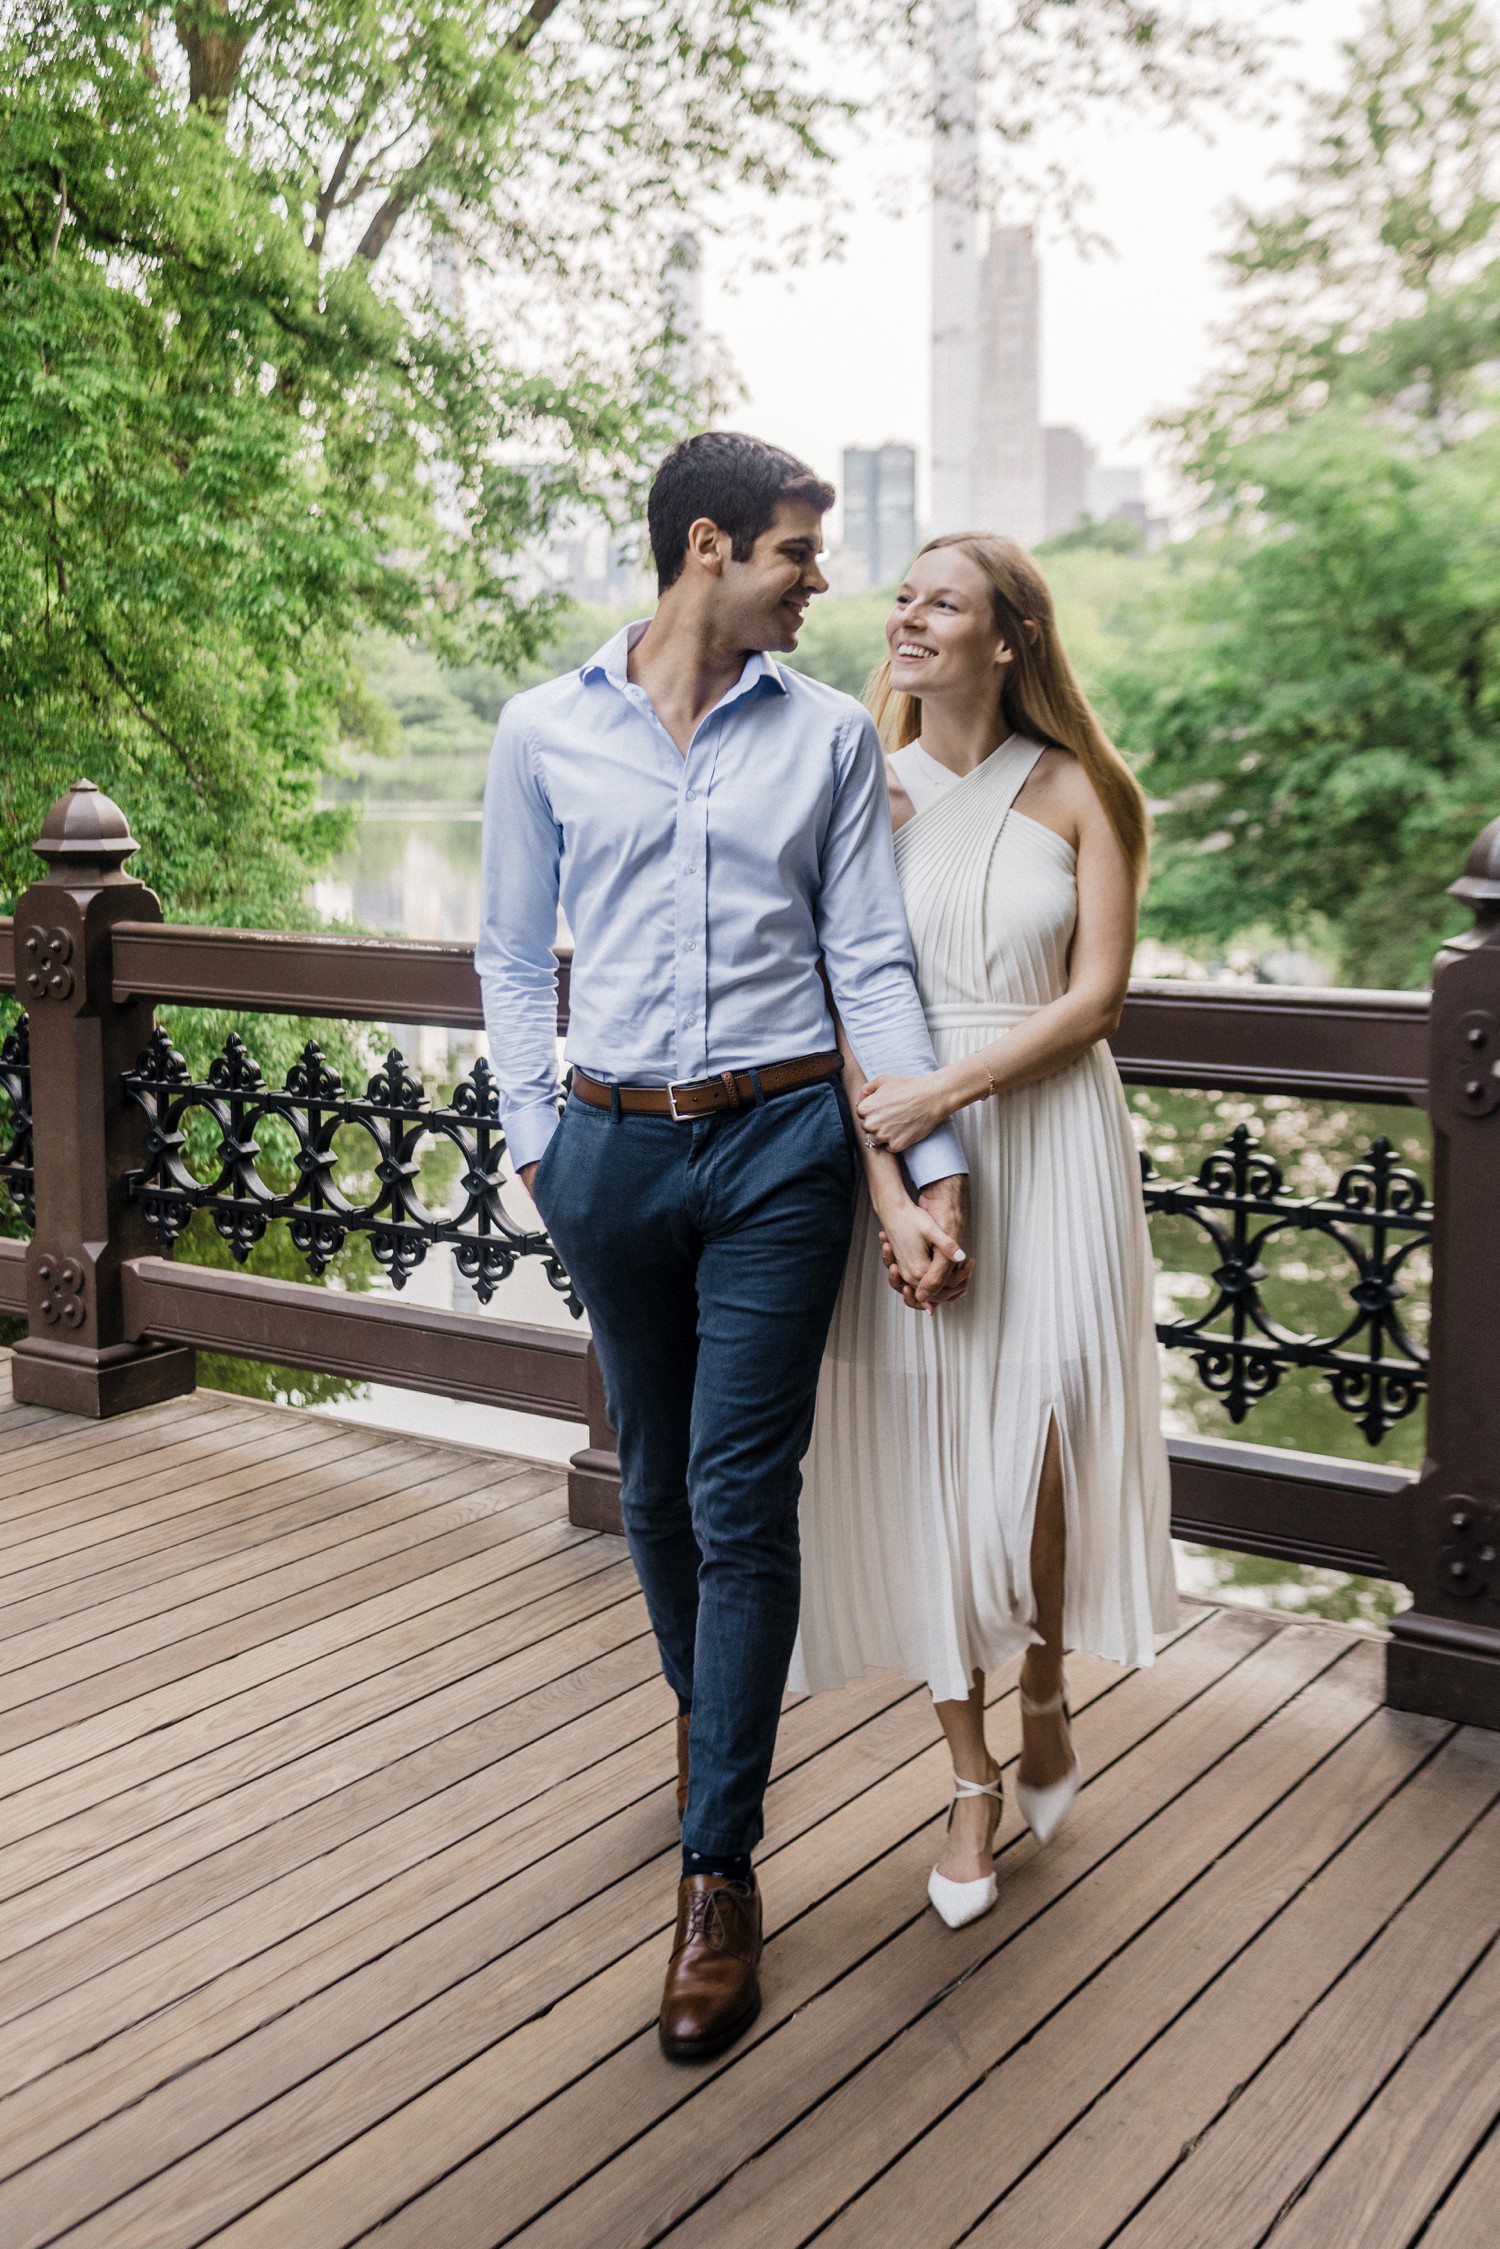 NYC engagement photo in Central Park.